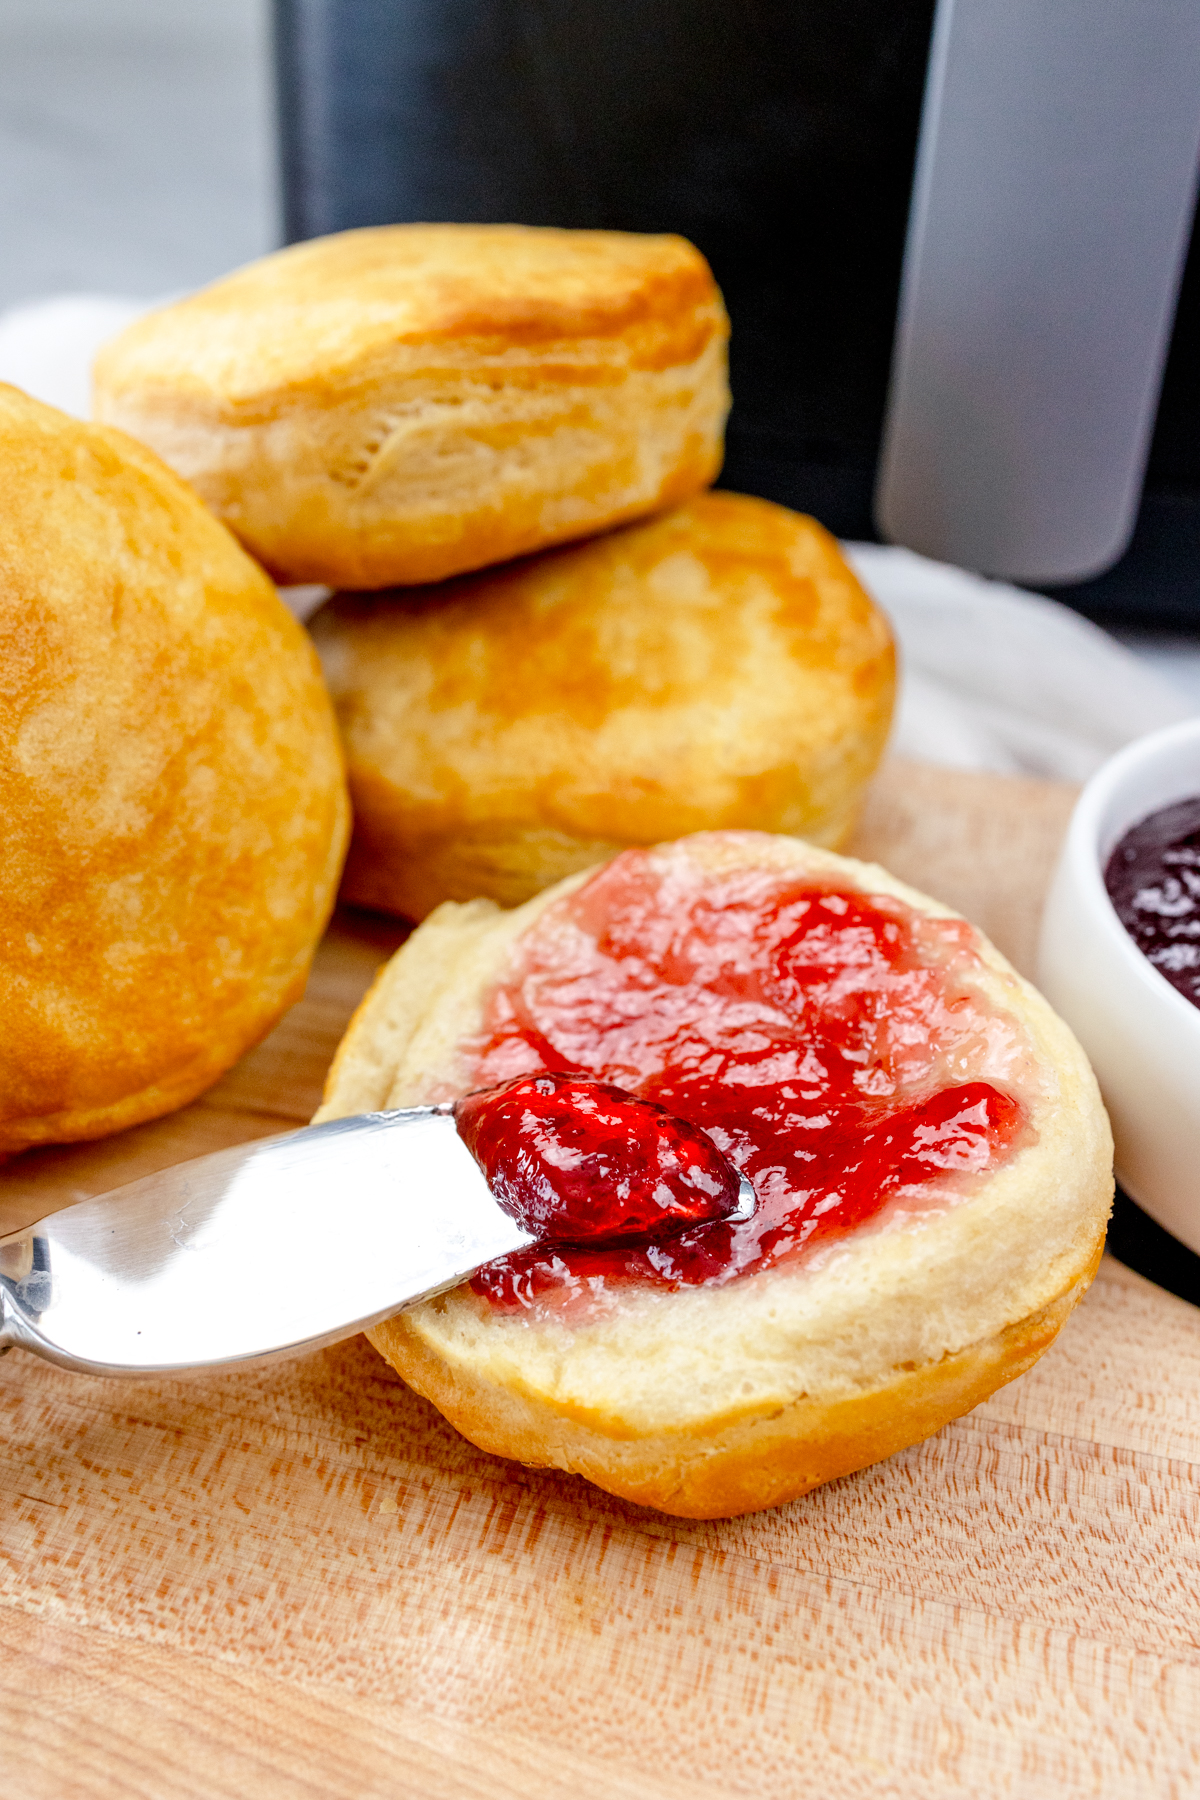 Close up view of Pillsbury Grand Biscuits fresh out of the air fryer, on a wooden surface, with the one in front sliced open and a knife is spreading a berry jam onto it.